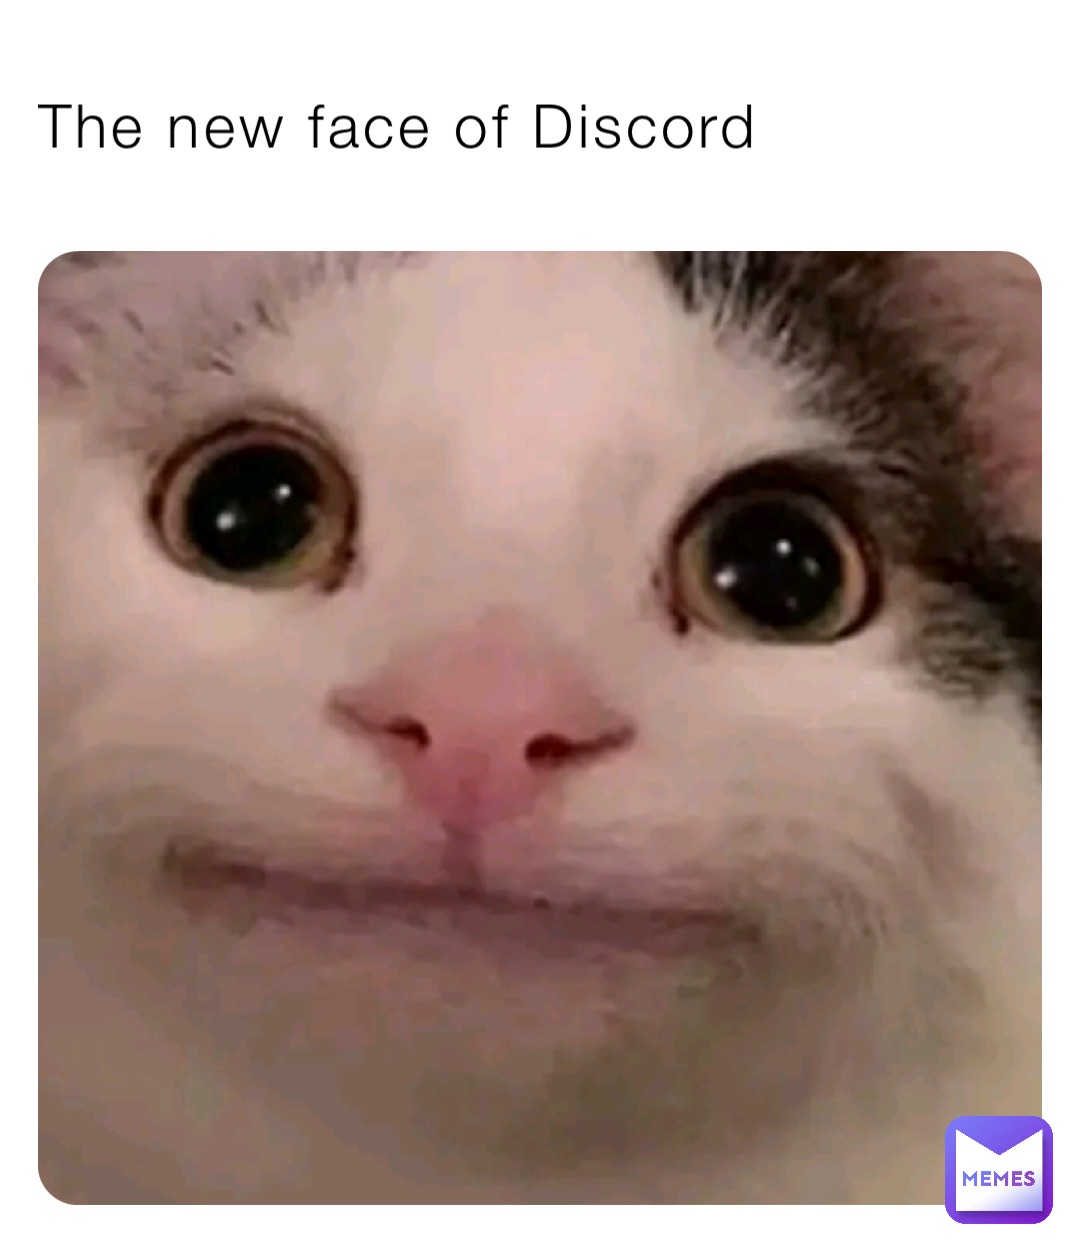 The new face of Discord